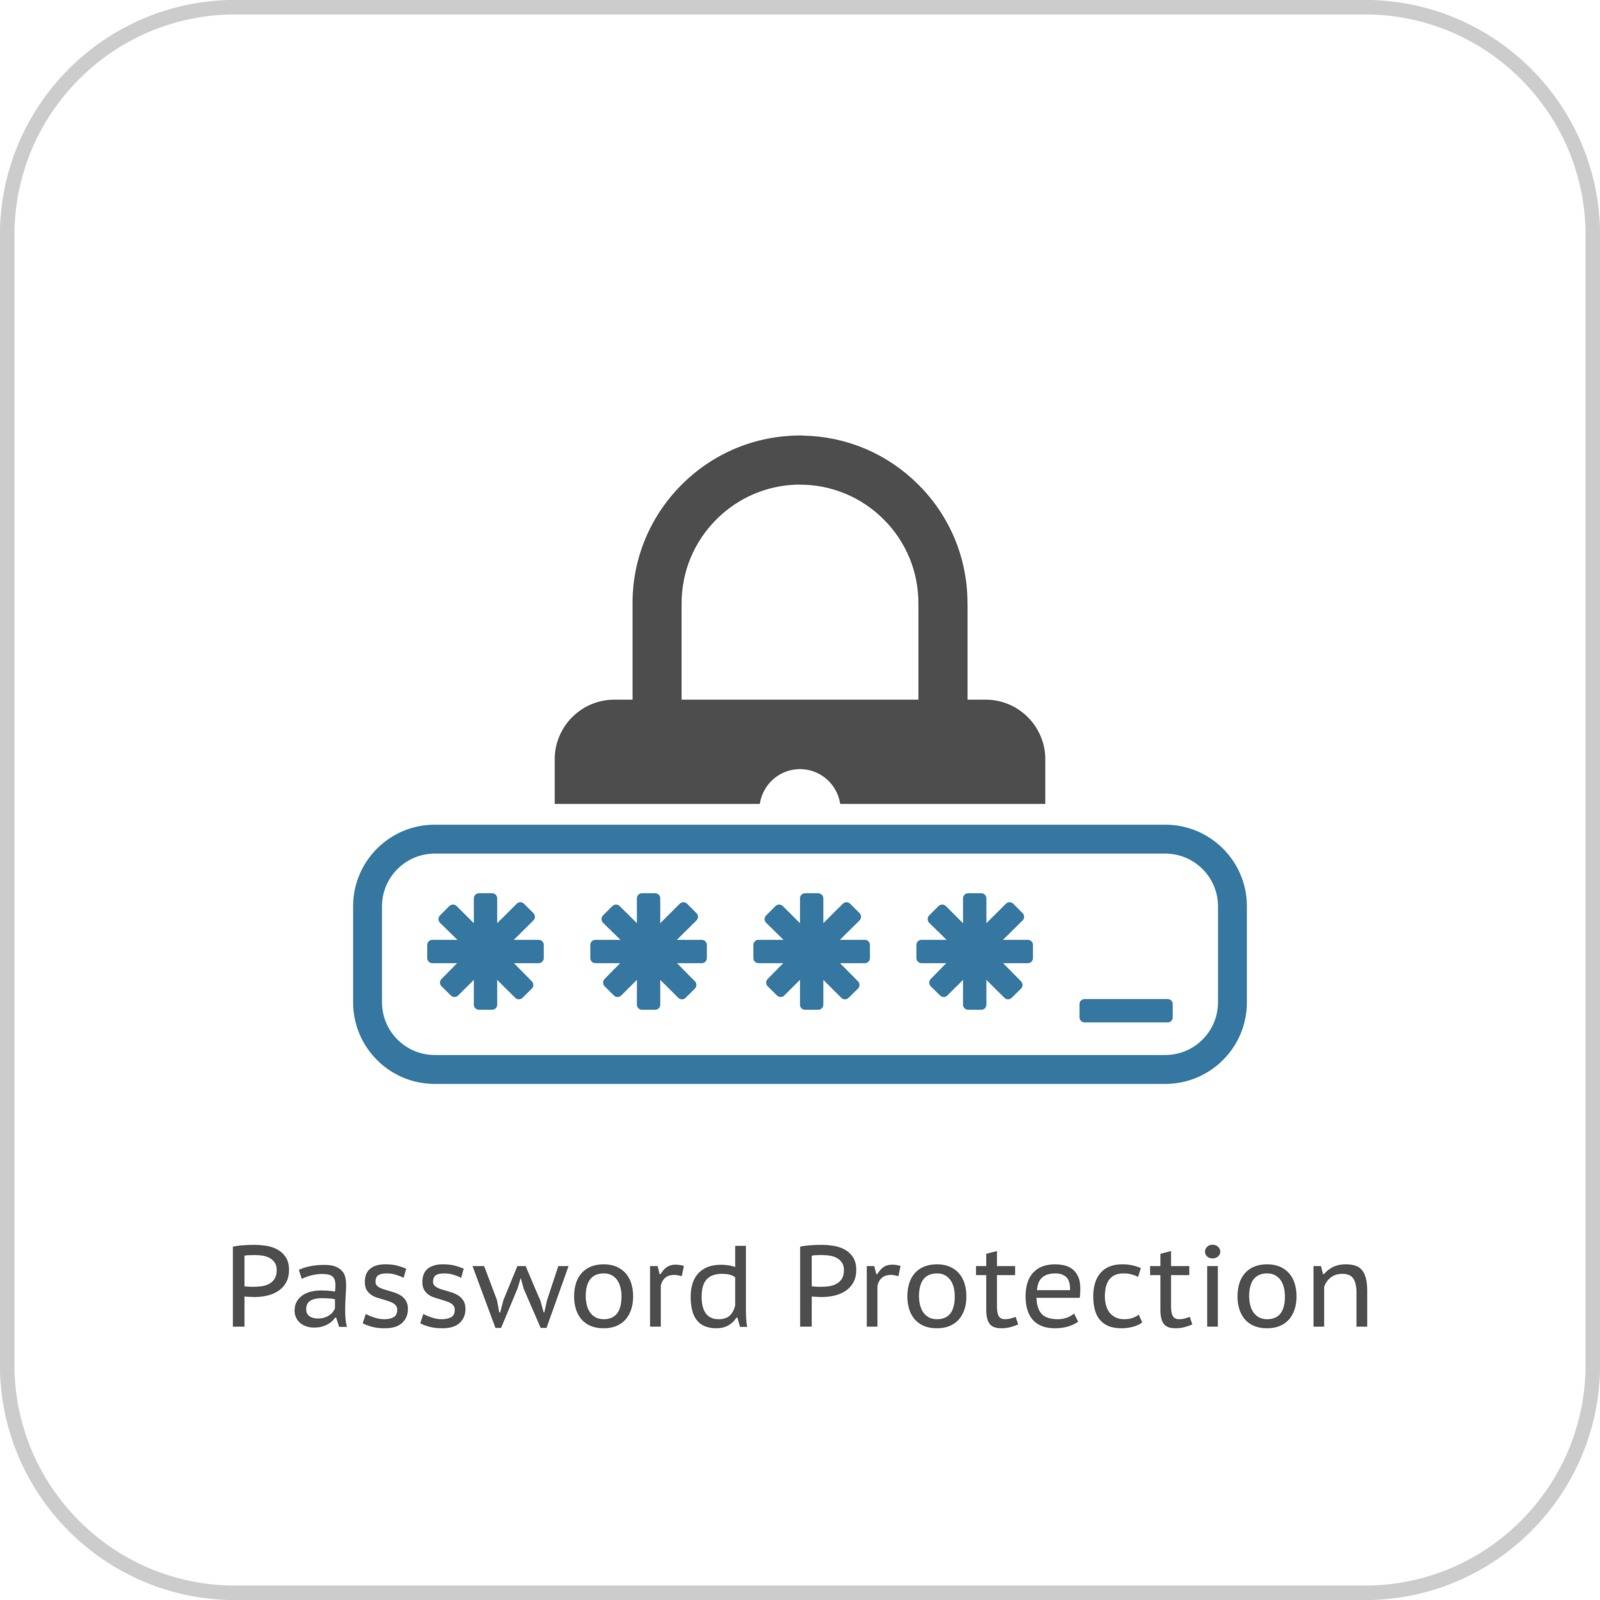 Password Protection Icon. Flat Design. by WaD